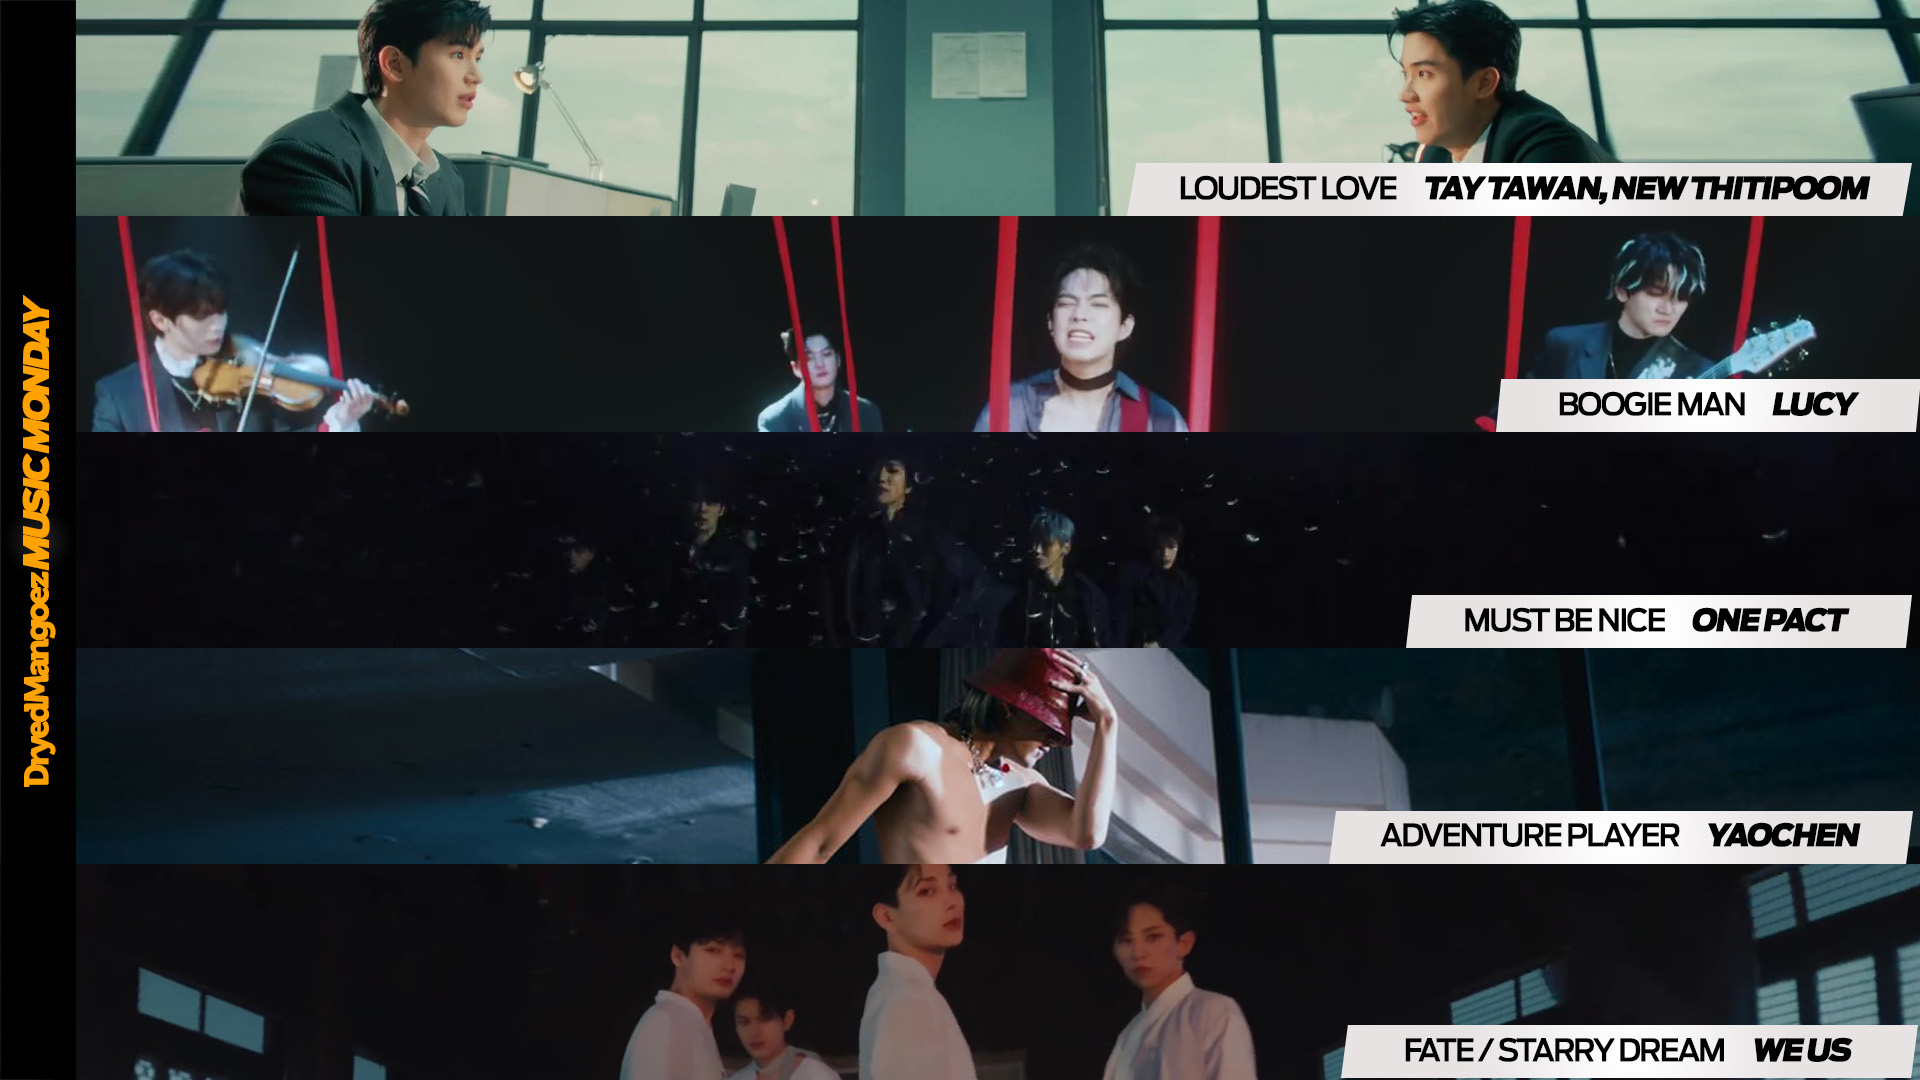 Music Monday, December 11, 2023 – Tay Tawan & New Thitipoom, LUCY, ONE PACT, Yaochen, WE US